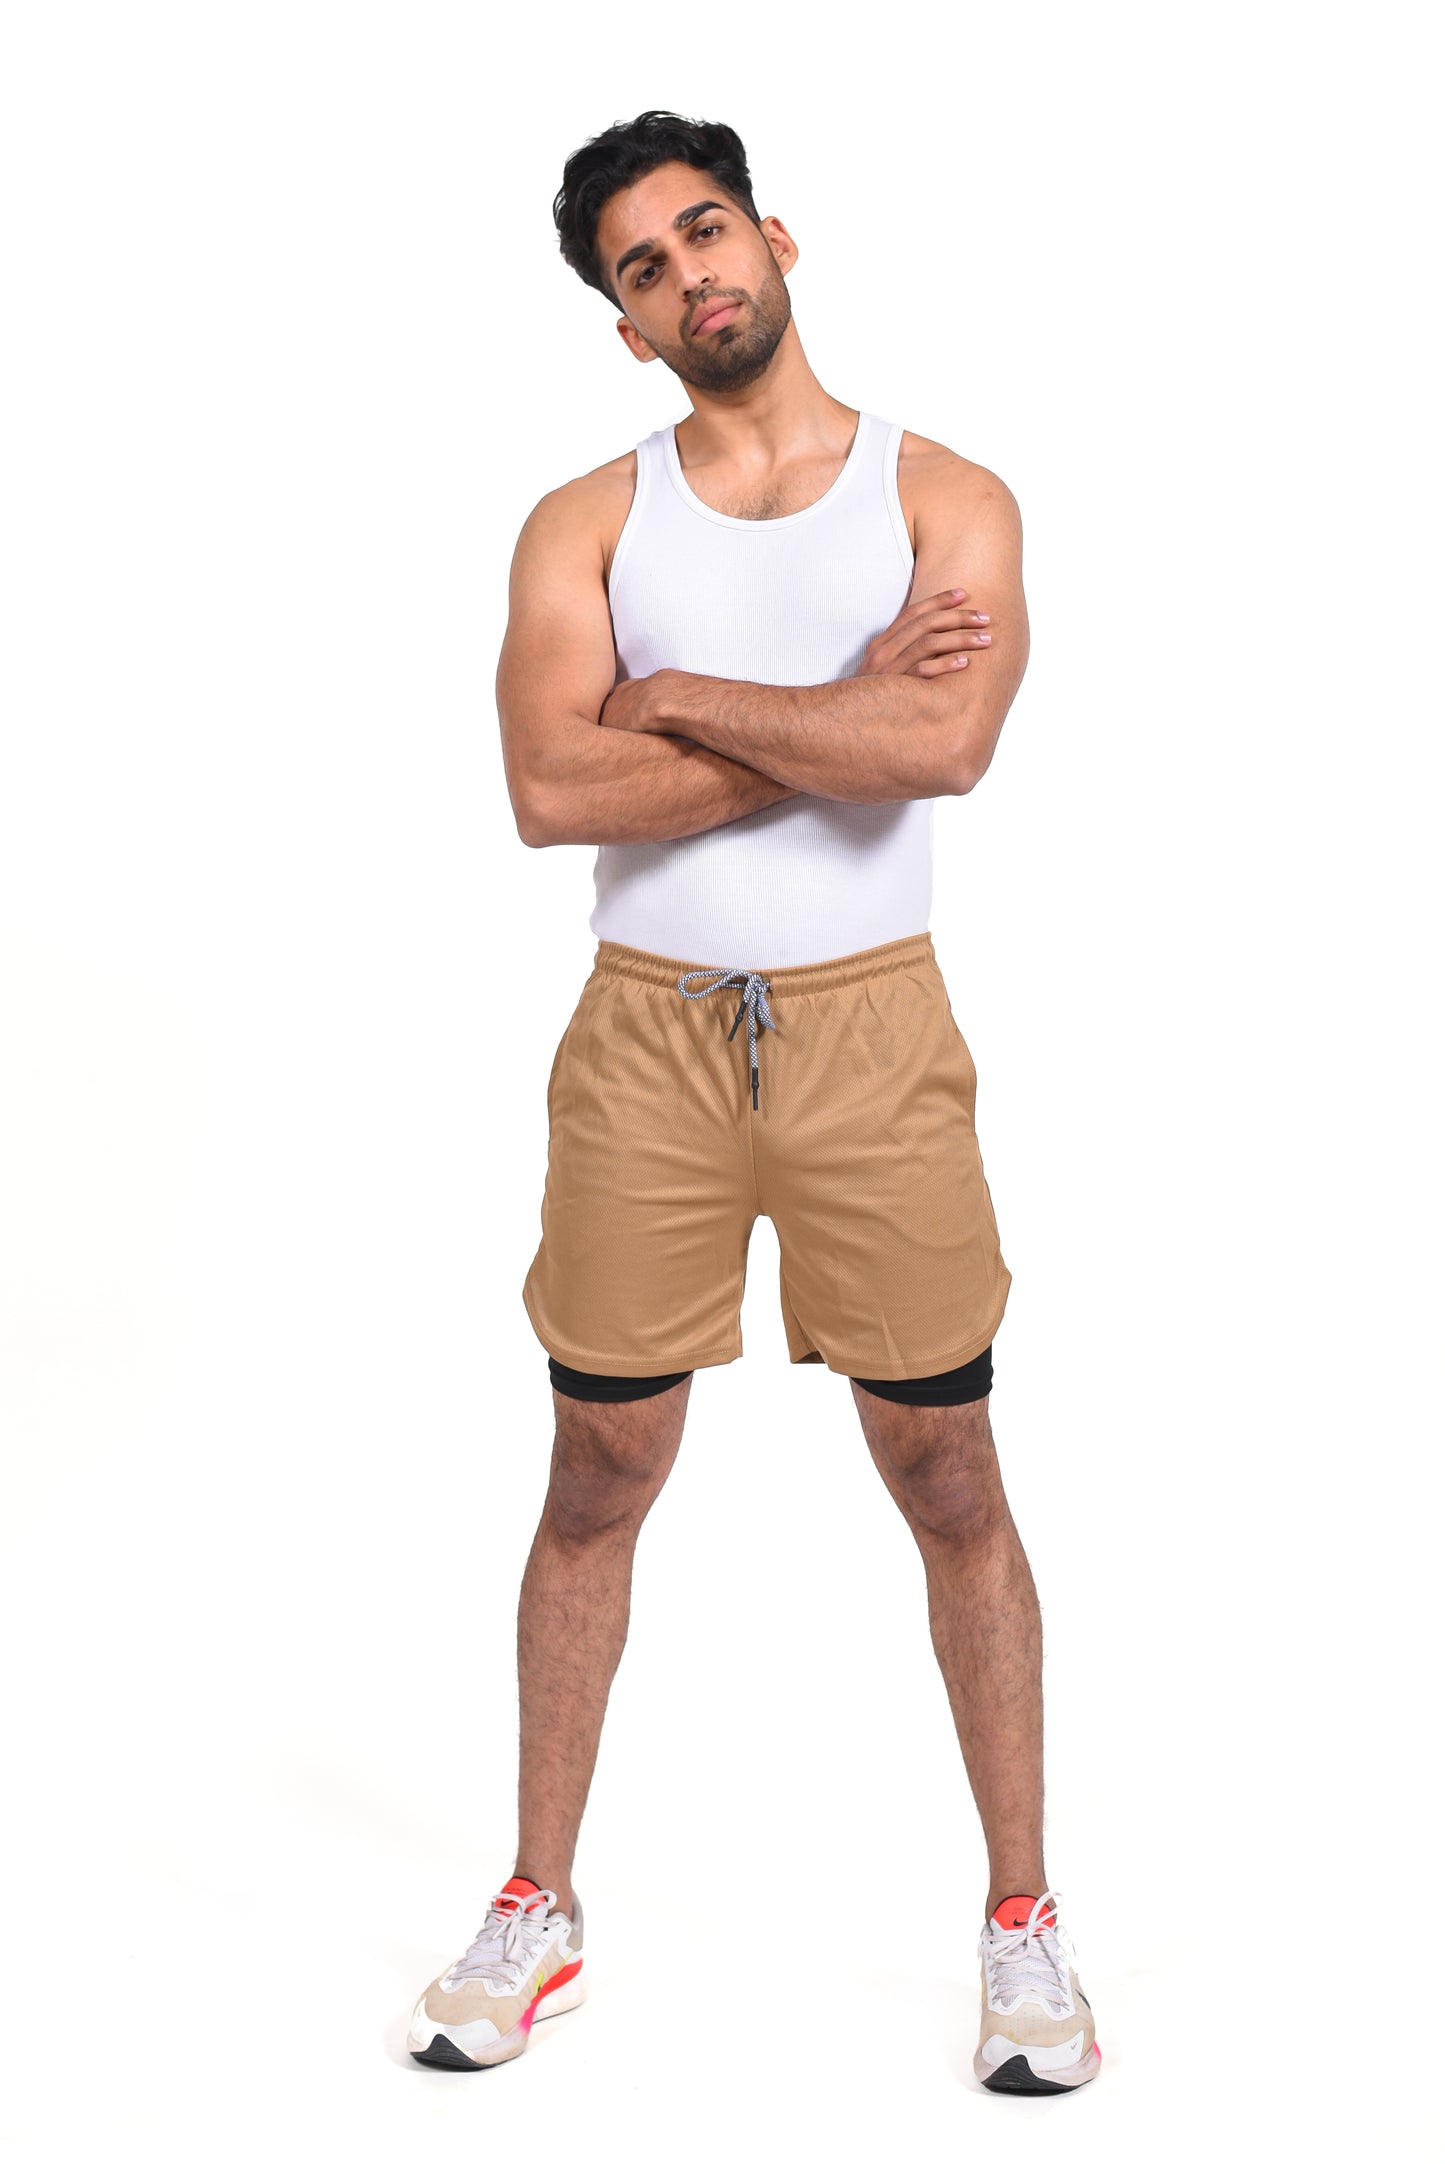 GYMSQUAD™ Innovative Men’s Sport Short - Ultimate Comfort (2 in 1 Features) - KHAKI